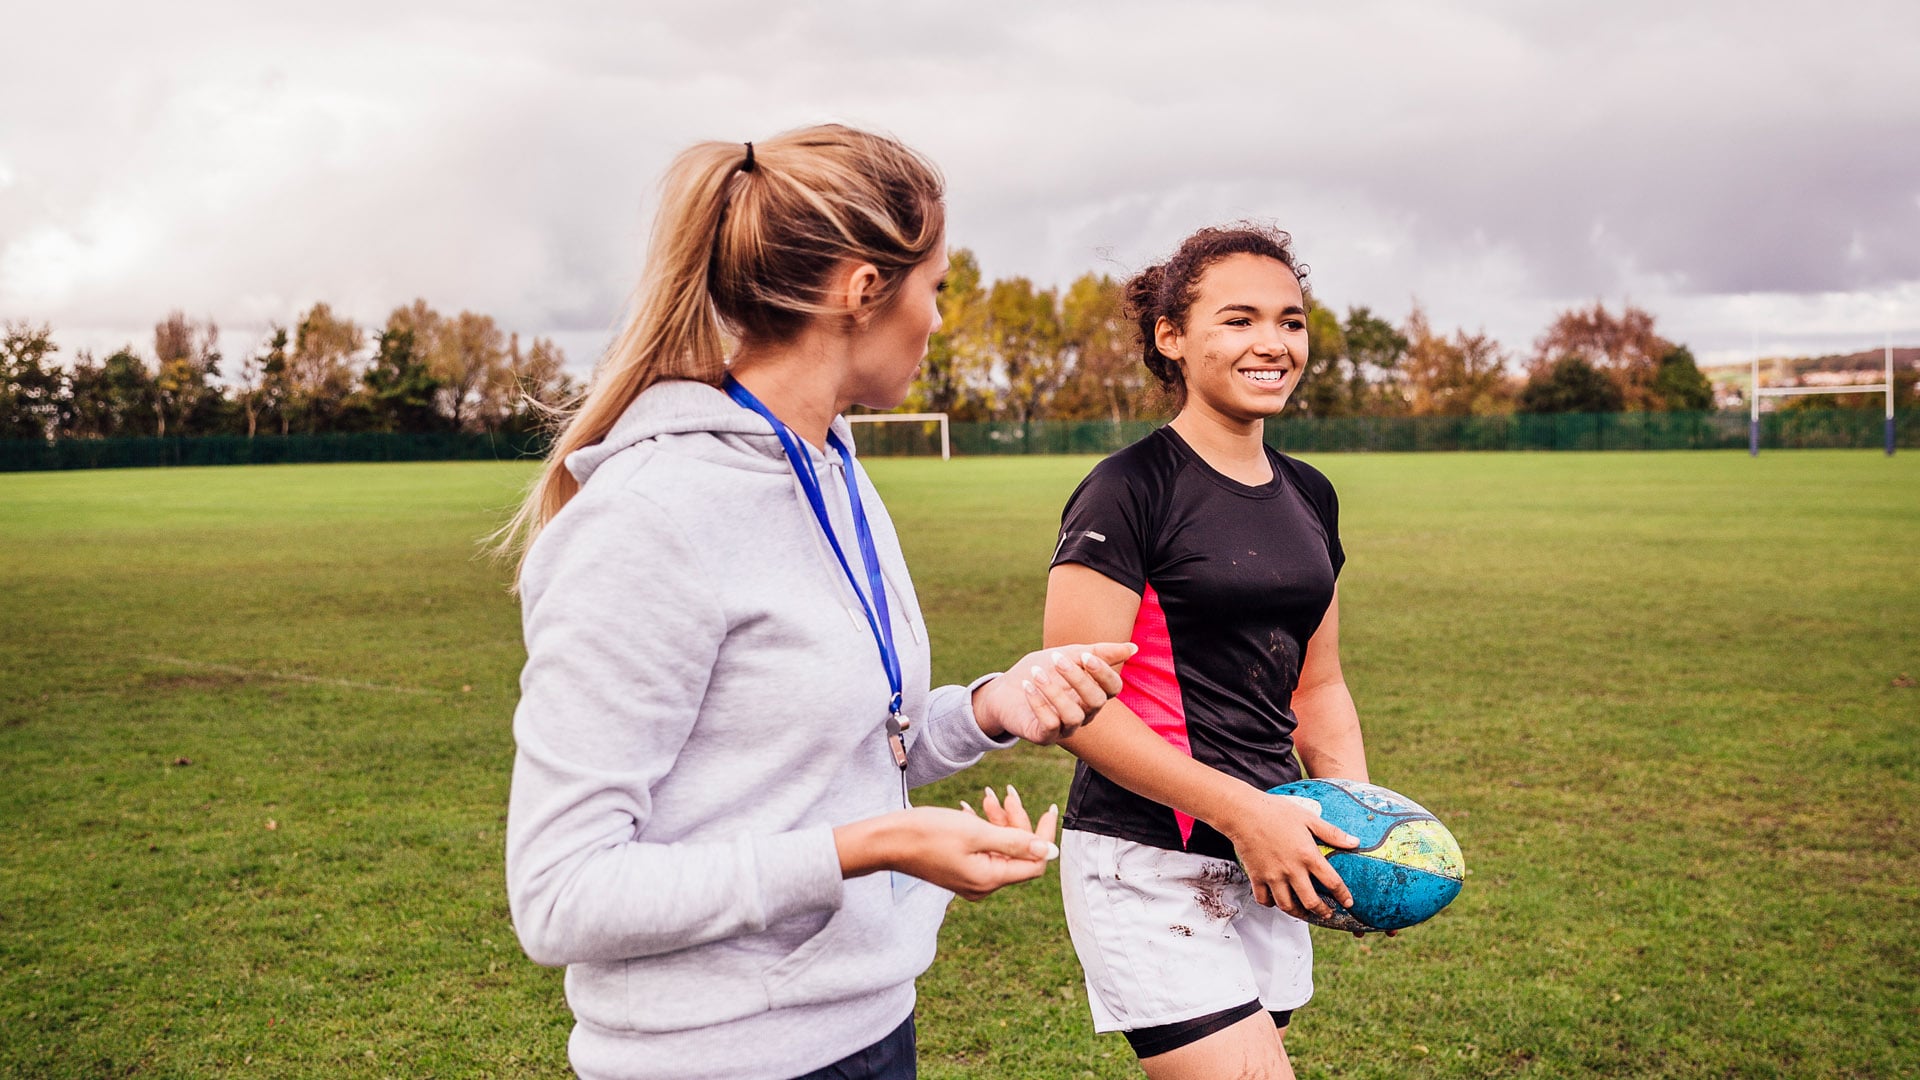 How to Become an Athletic Trainer - Career Girls - Explore Careers